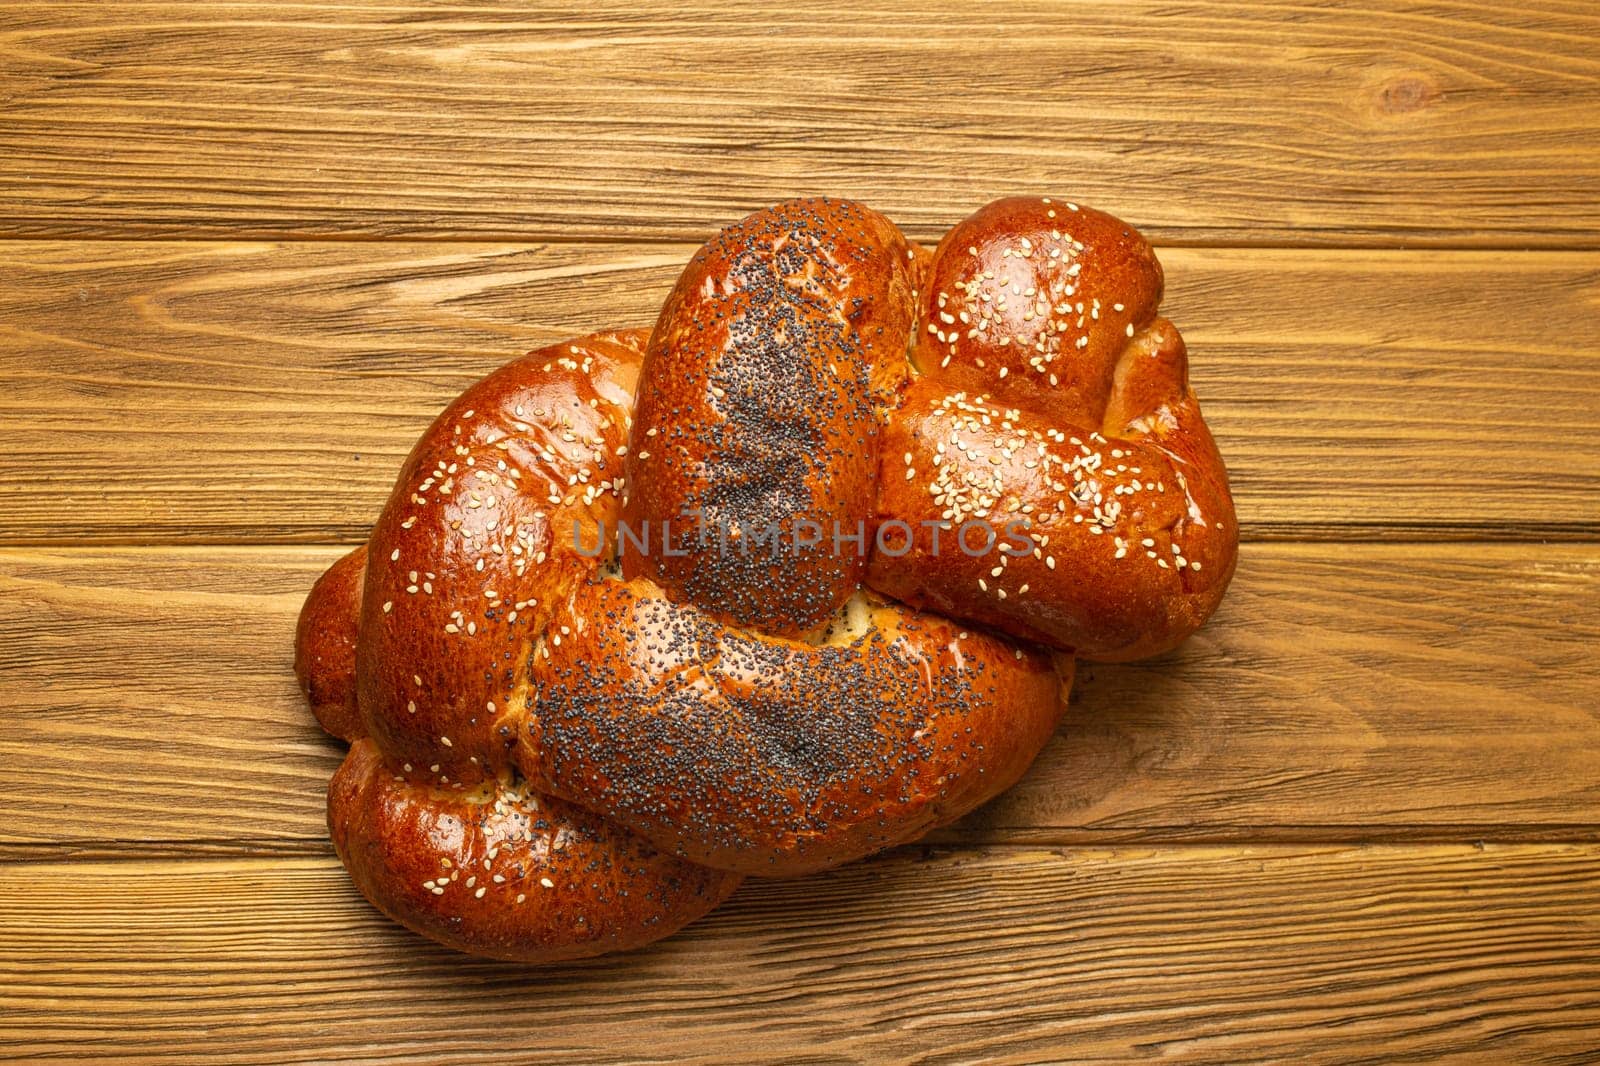 Freshly baked Challah bread covered with poppy and sesame seeds, top view on rustic wooden background, traditional festive Jewish cuisine by its_al_dente